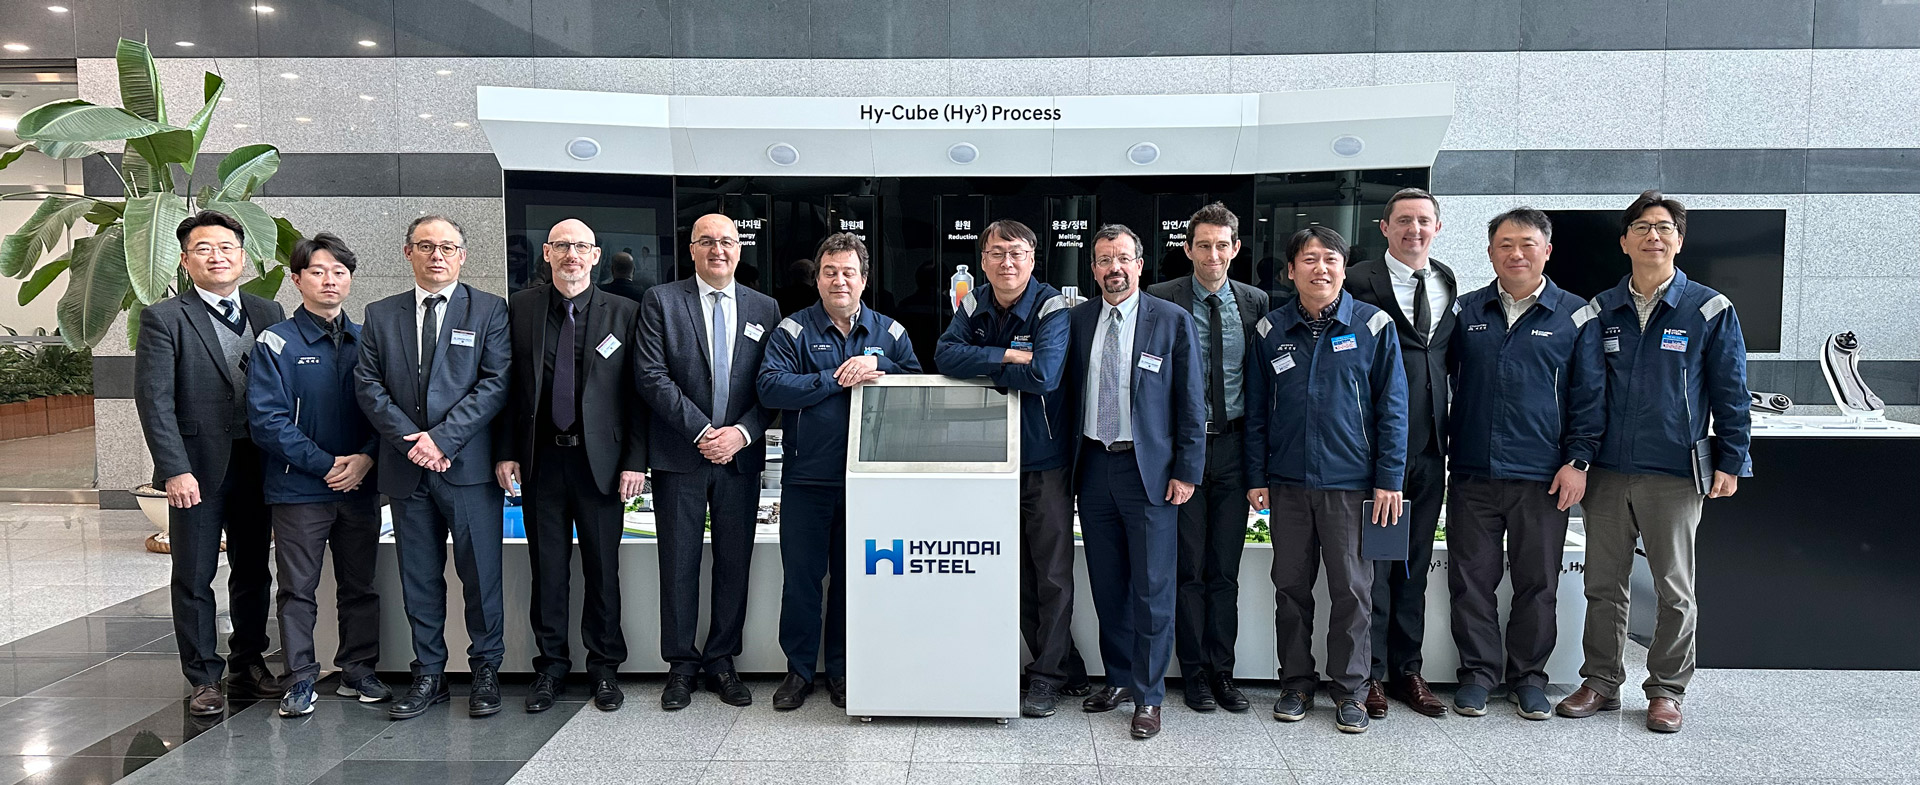 Hyundai Steel and Fives held their joint Future Tech Forum at Hyundai’s R&D center 